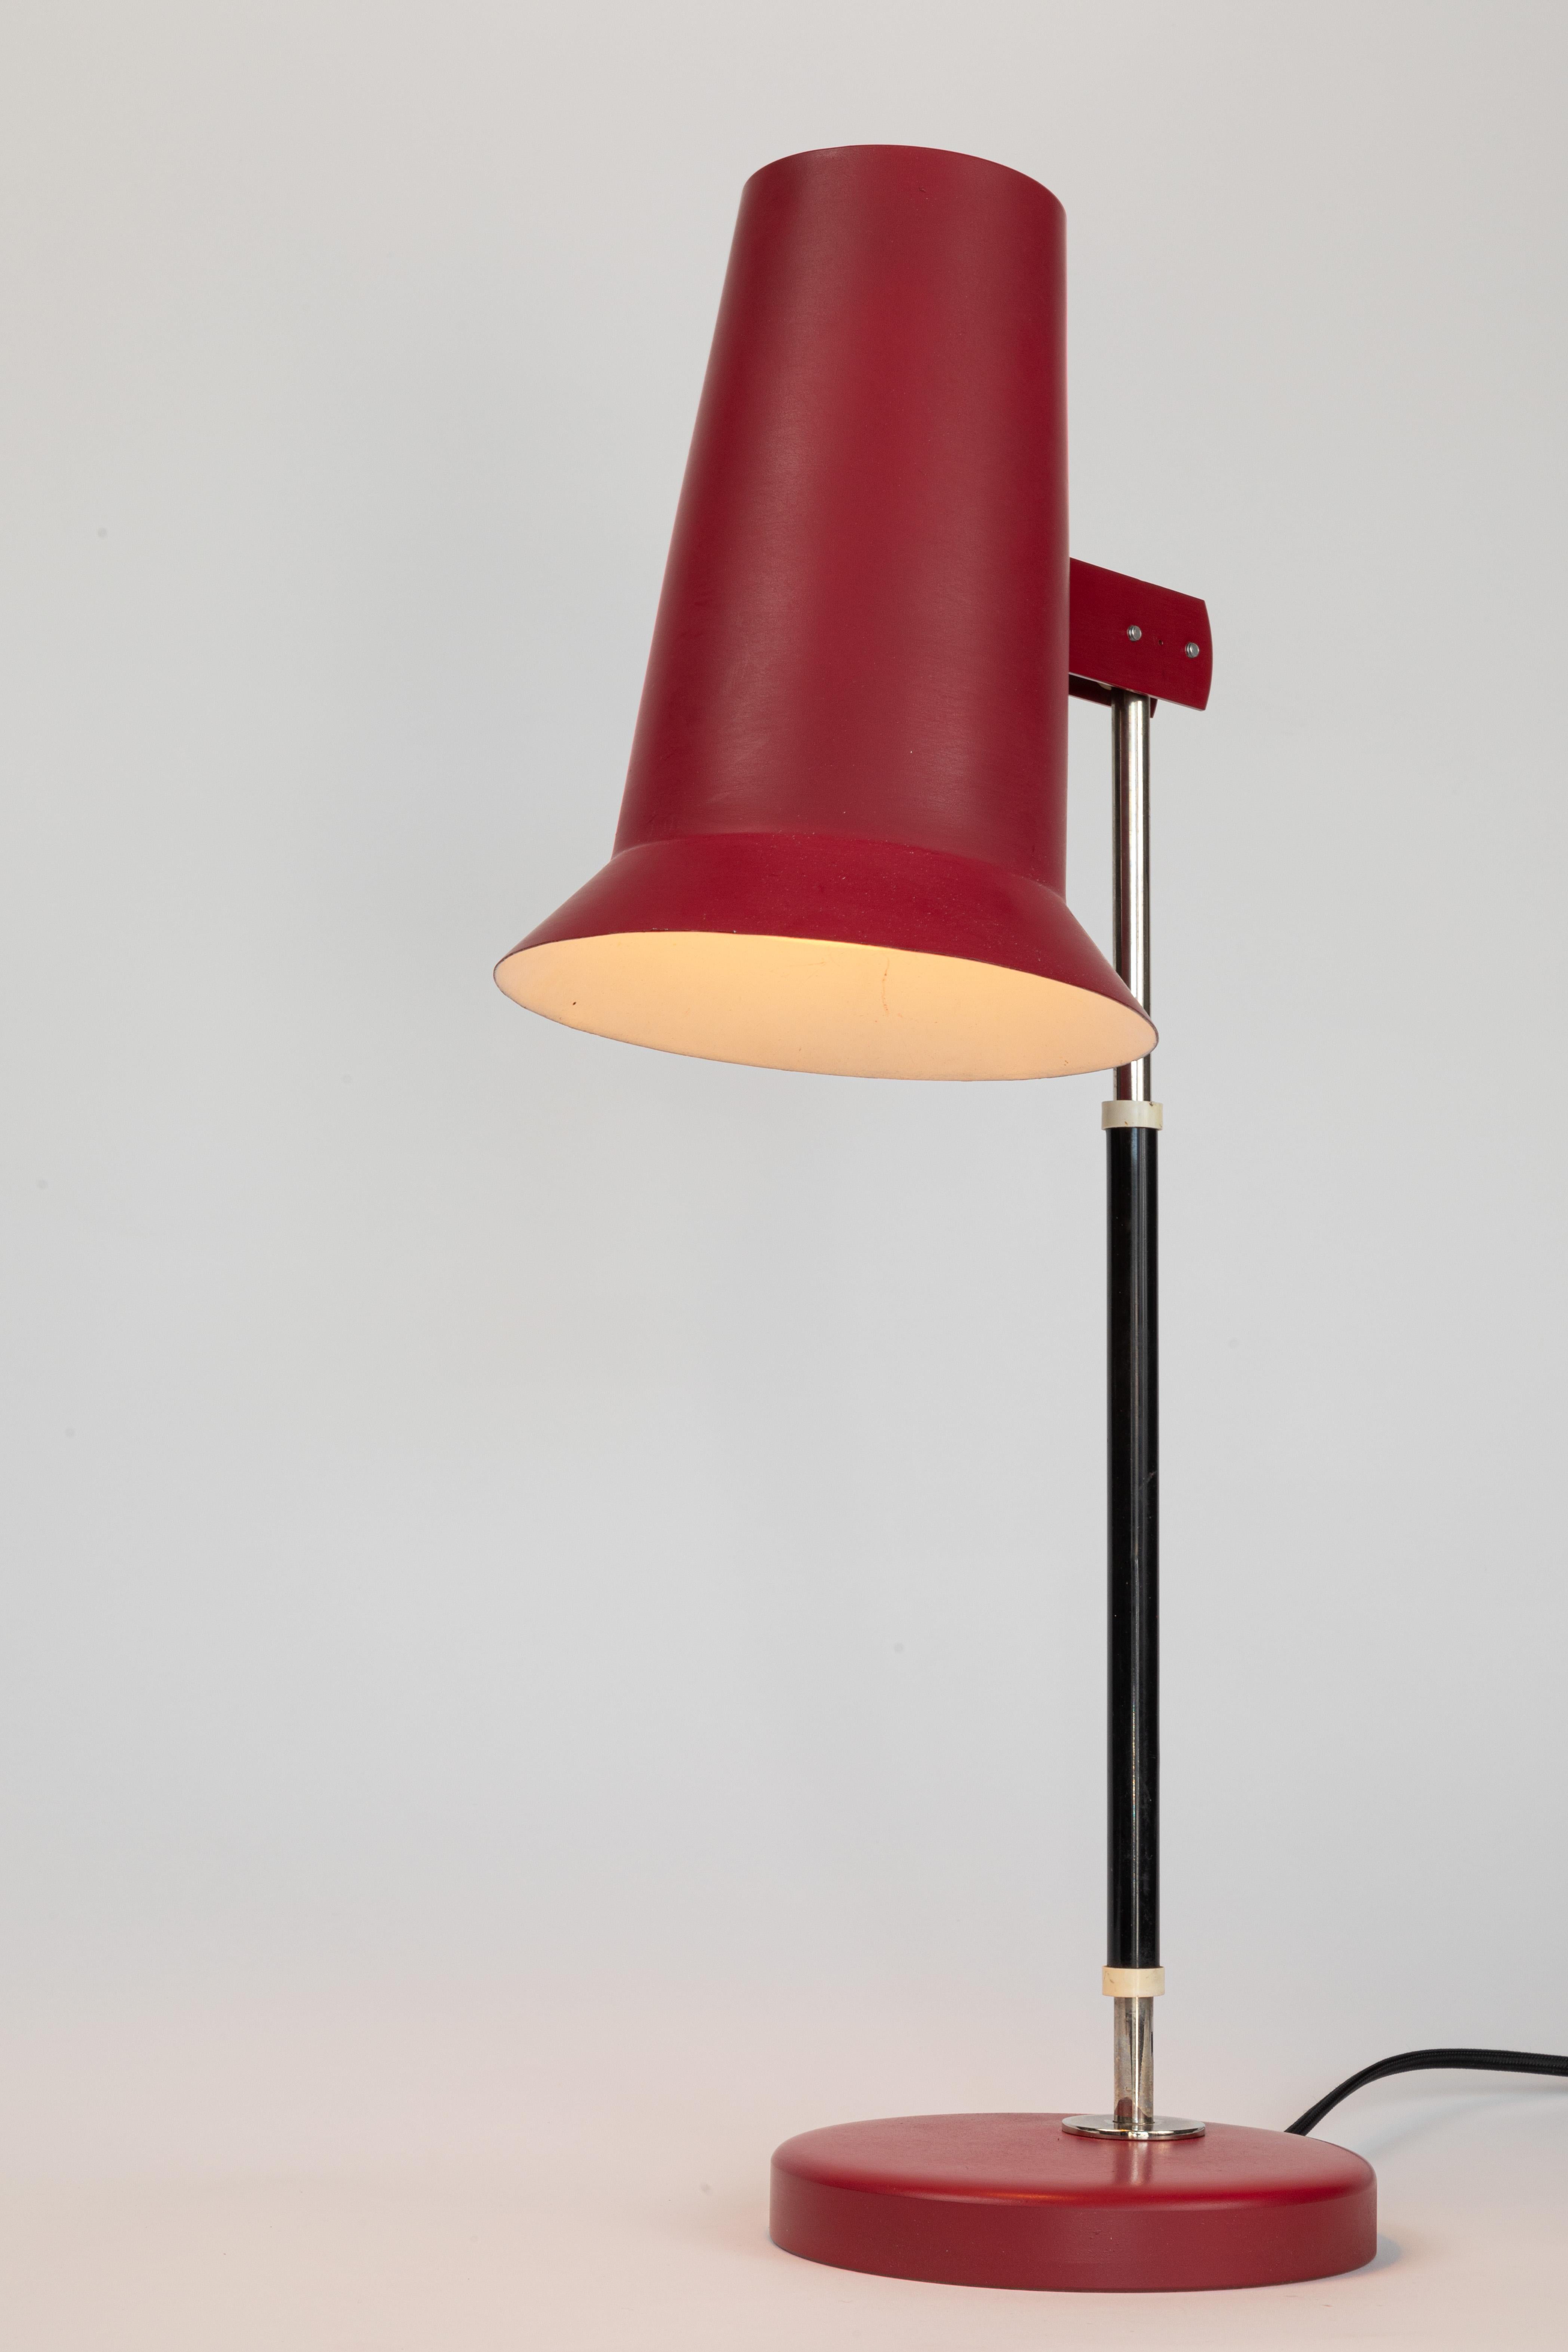 Painted Pair of 1960s Yki Nummi Series 40-040 Red Table Lamps for Stockmann-Orno For Sale